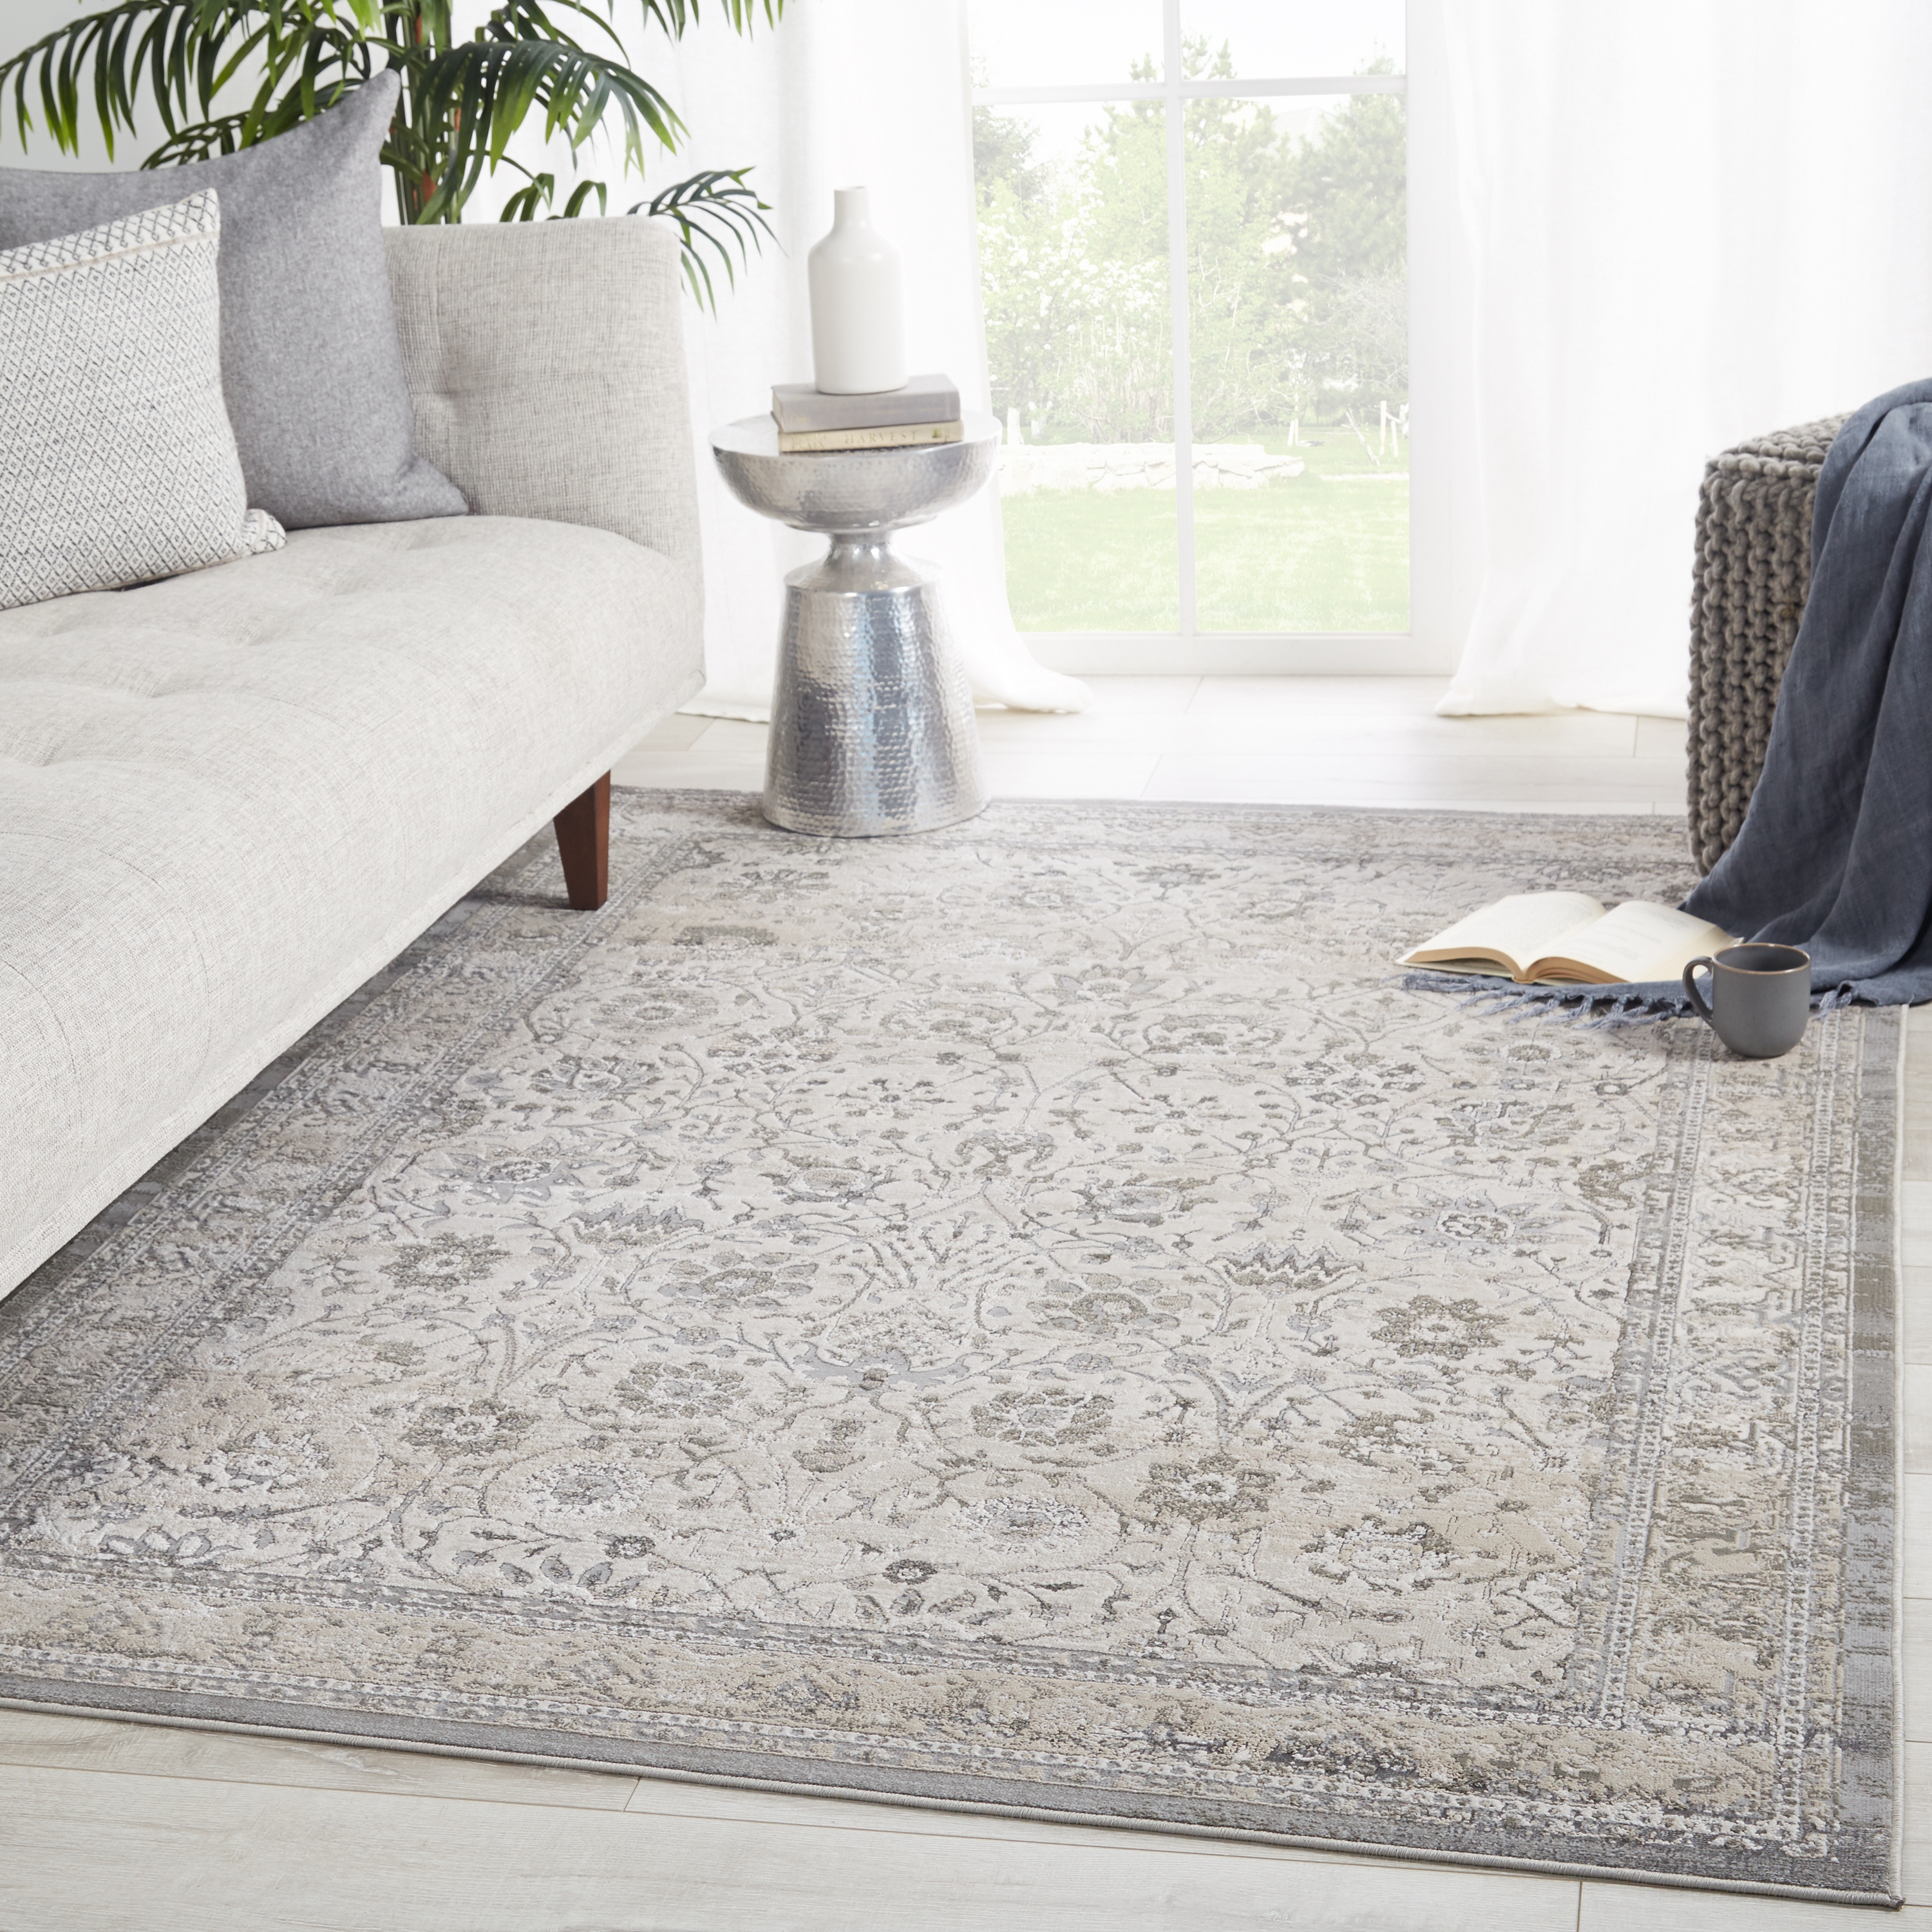 Vibe by Odel Oriental Gray/ White Area Rug (6'7"X9'6") - Image 4